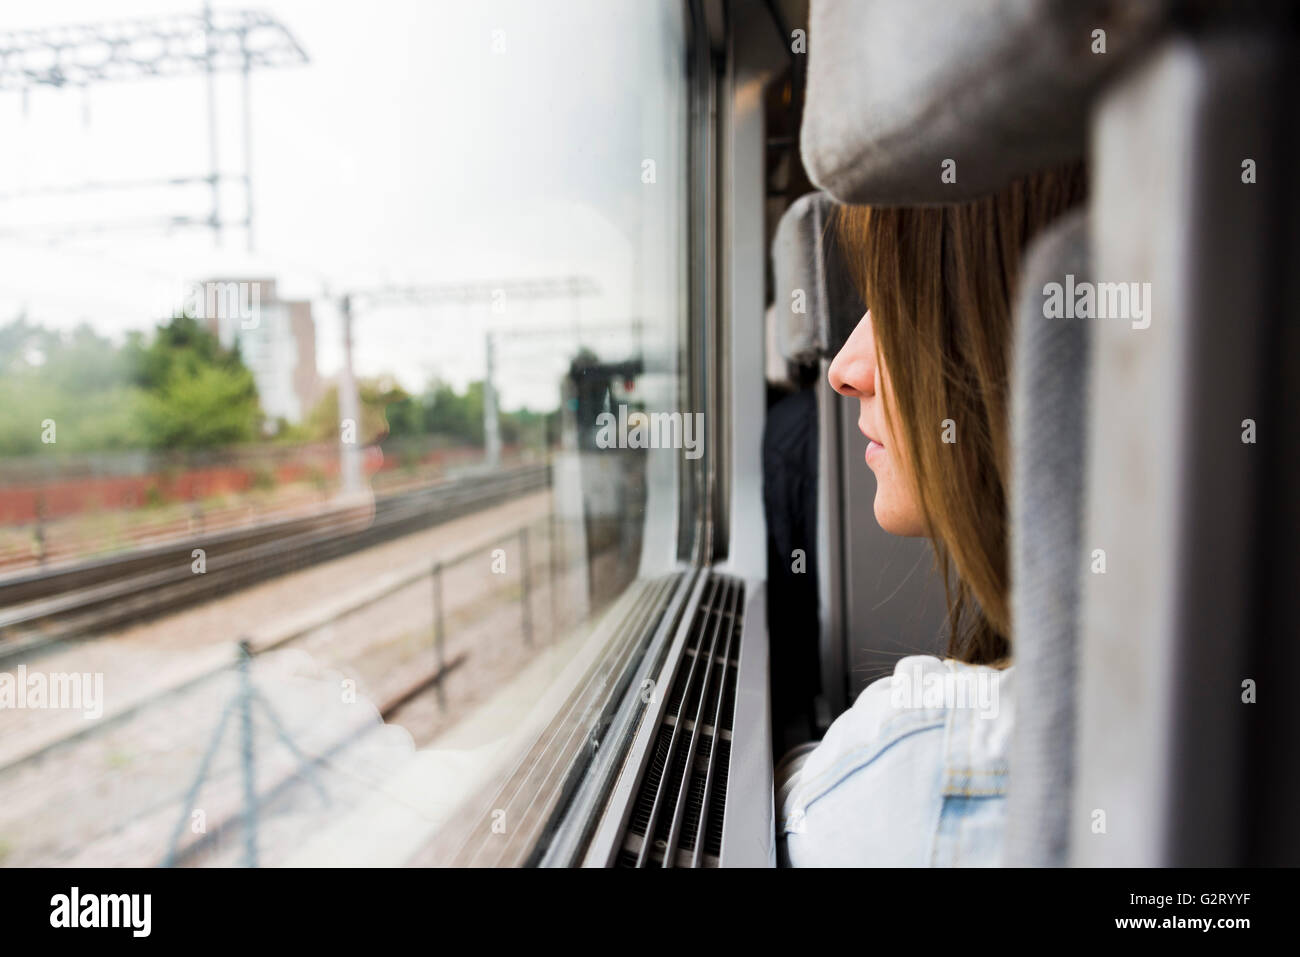 A young woman sitting on a train seat looking throught the window at the city passing by. Stock Photo